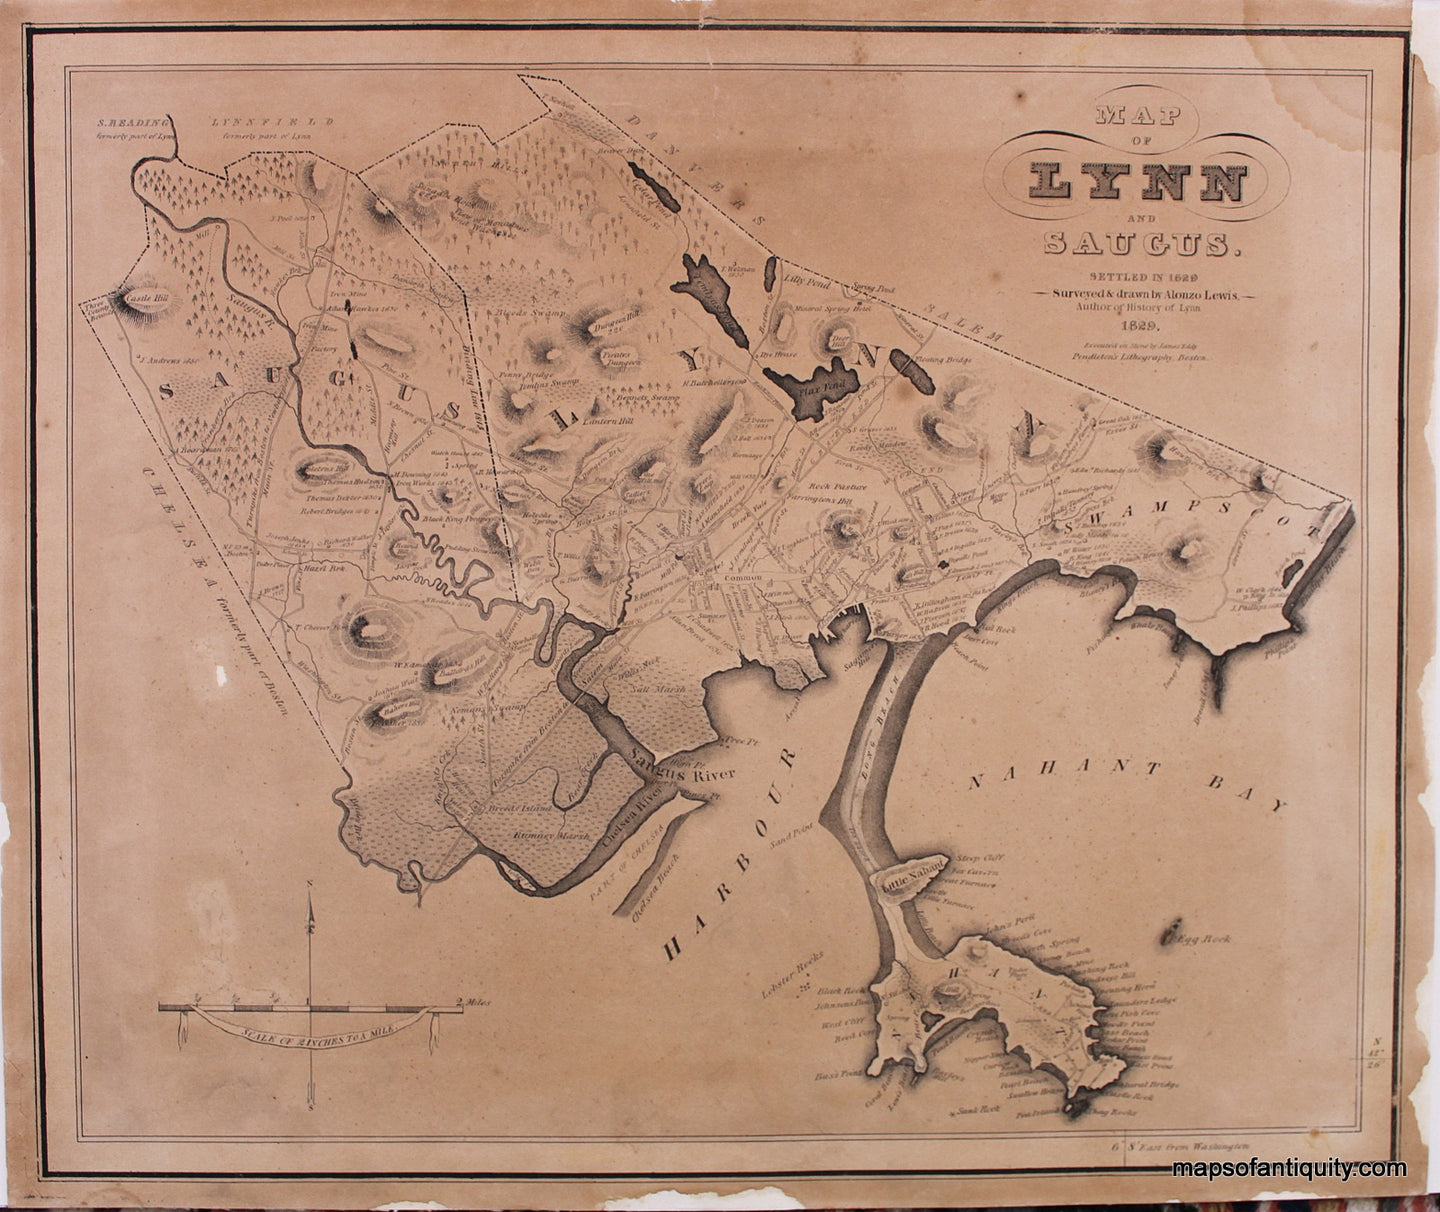 Antique-Black-and-White-Map-Map-of-Lynn-and-Saugus.-Settled-in-1629.-US-Massachusetts-Lynn-1829-Lewis-Maps-Of-Antiquity